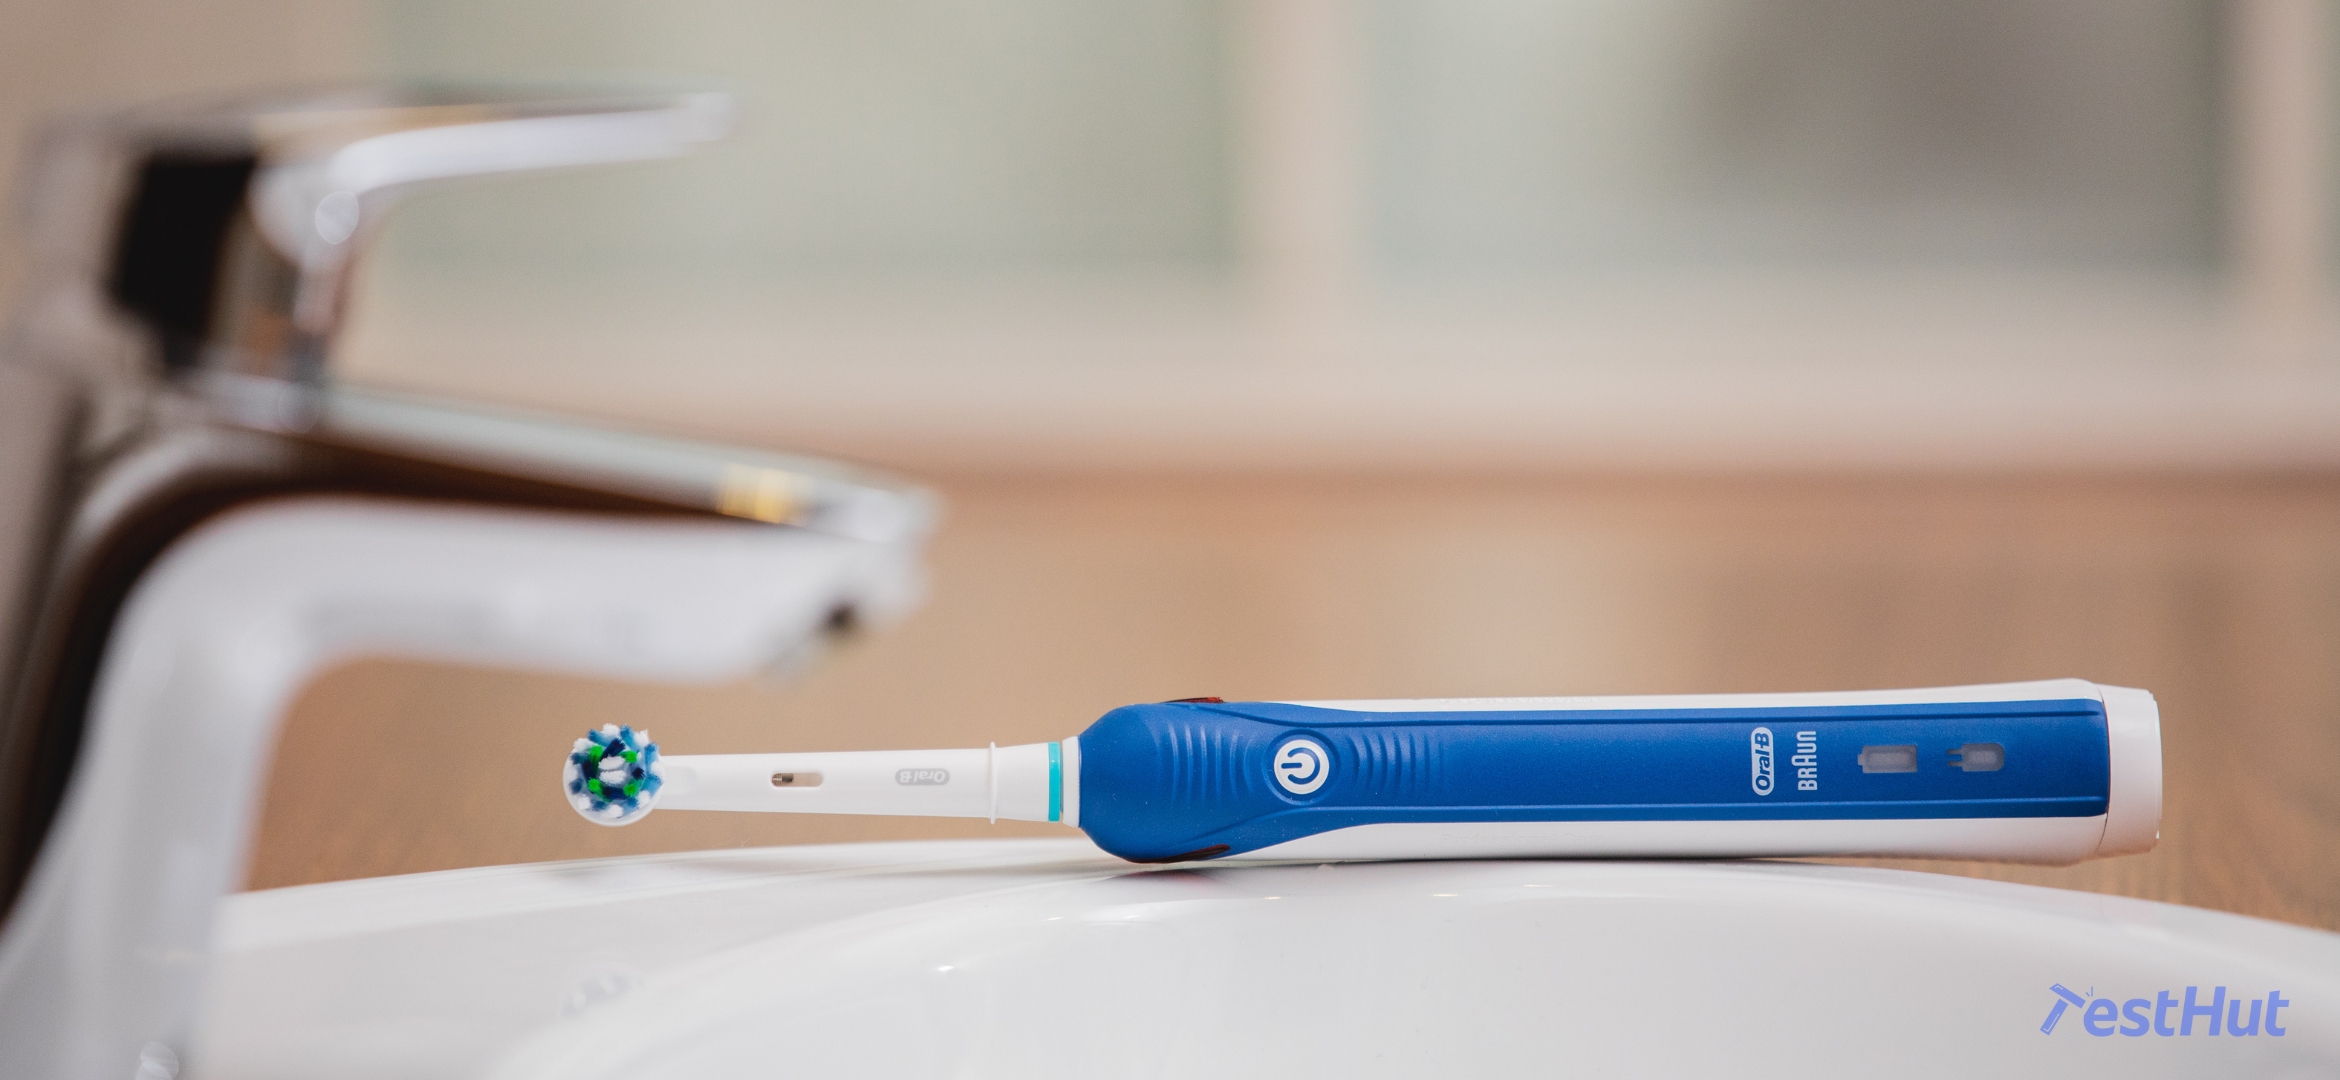 Syndicaat Paar Diploma Oral-B Pro 3 3000 Electric Toothbrush Review | Tested by TestHut